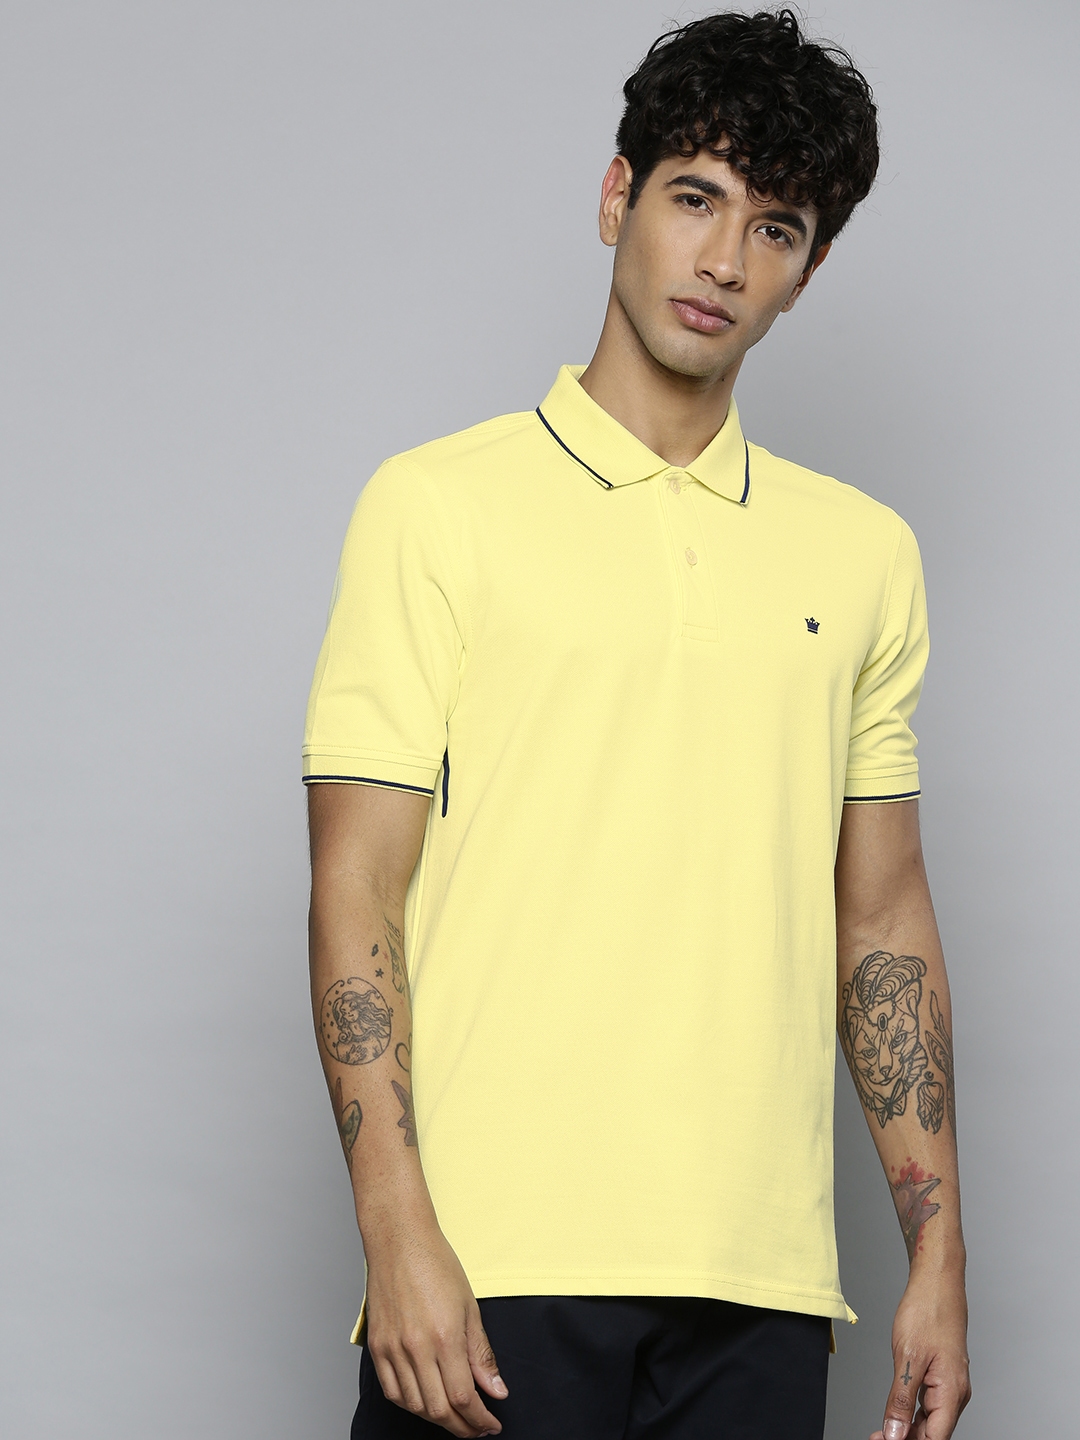 Louis Philippe Men Yellow Solid Polo T-Shirt